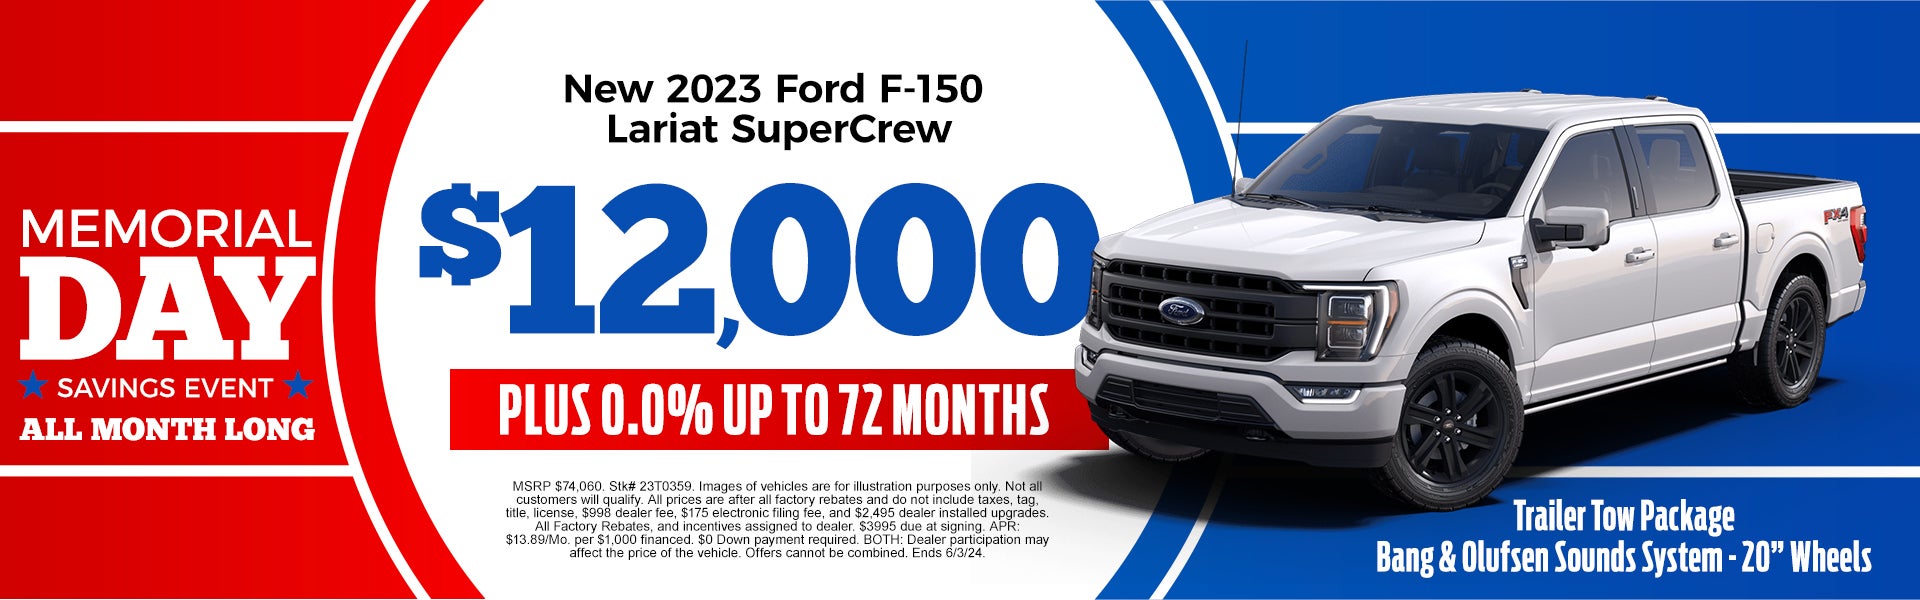 Get up to $12,000 off MSRP + 0.0% Financing for up to 72/mo